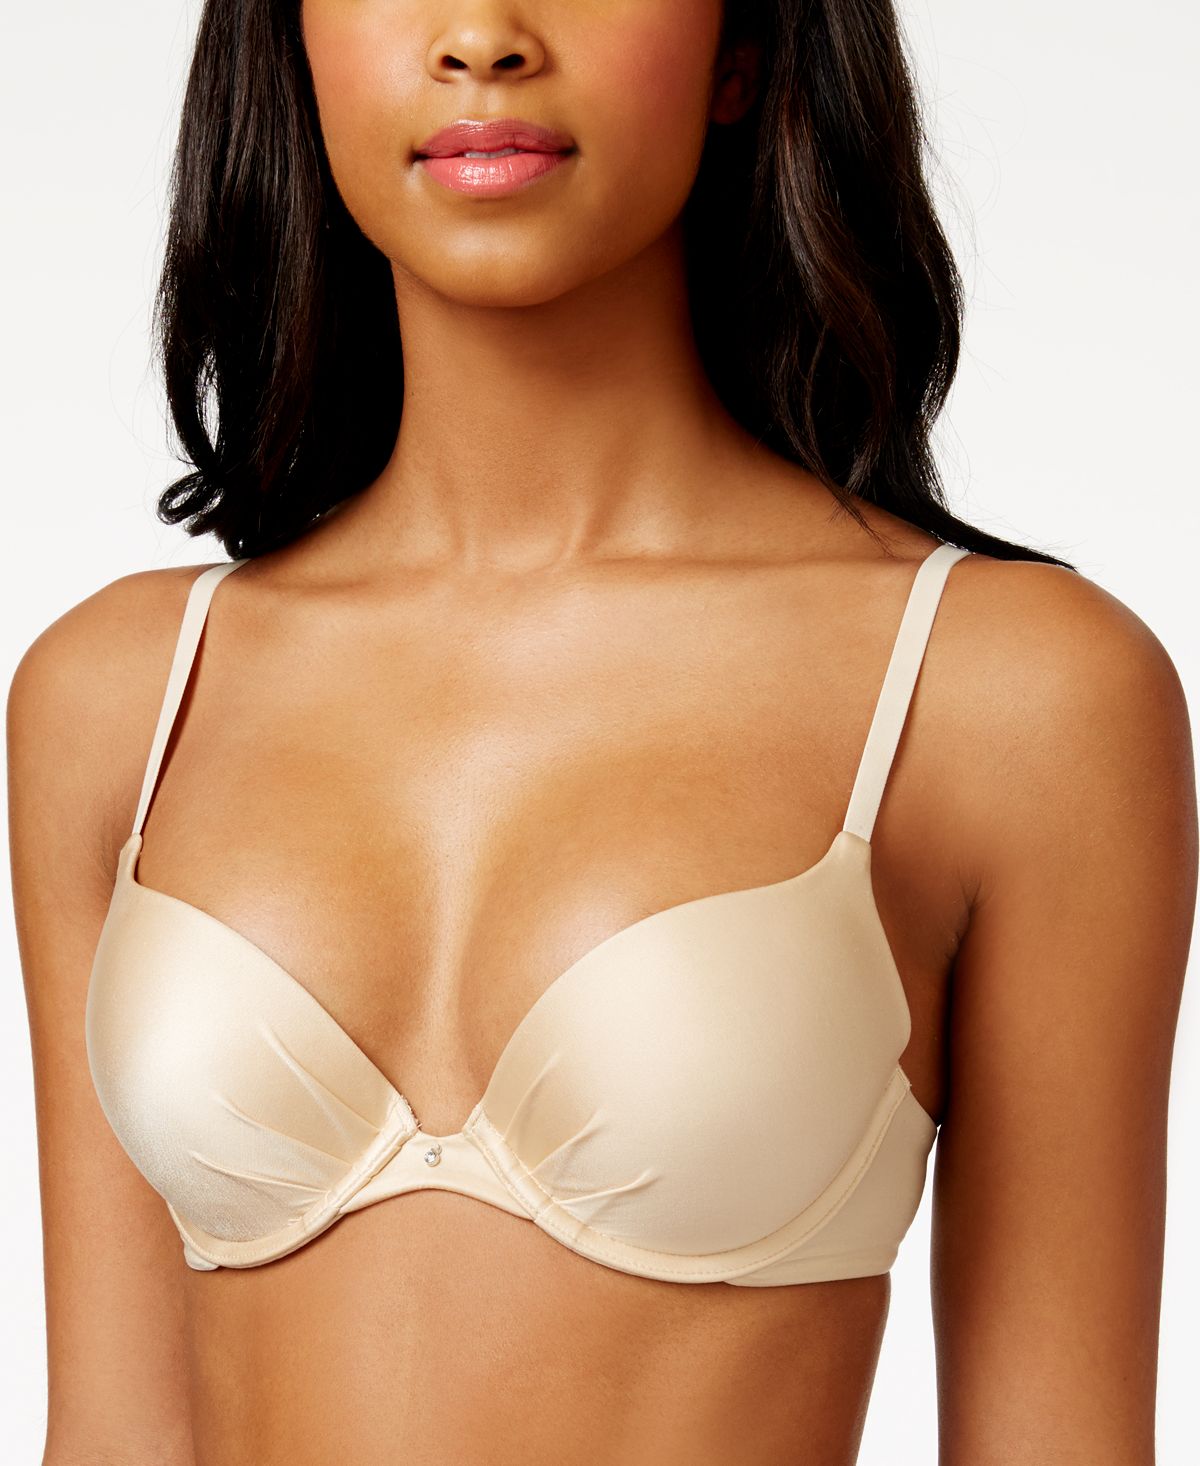 Maidenform Self Expressions Women's 2pk Convertible Push-Up Lace Wing Bra  5809 - Beige/Black 38DD